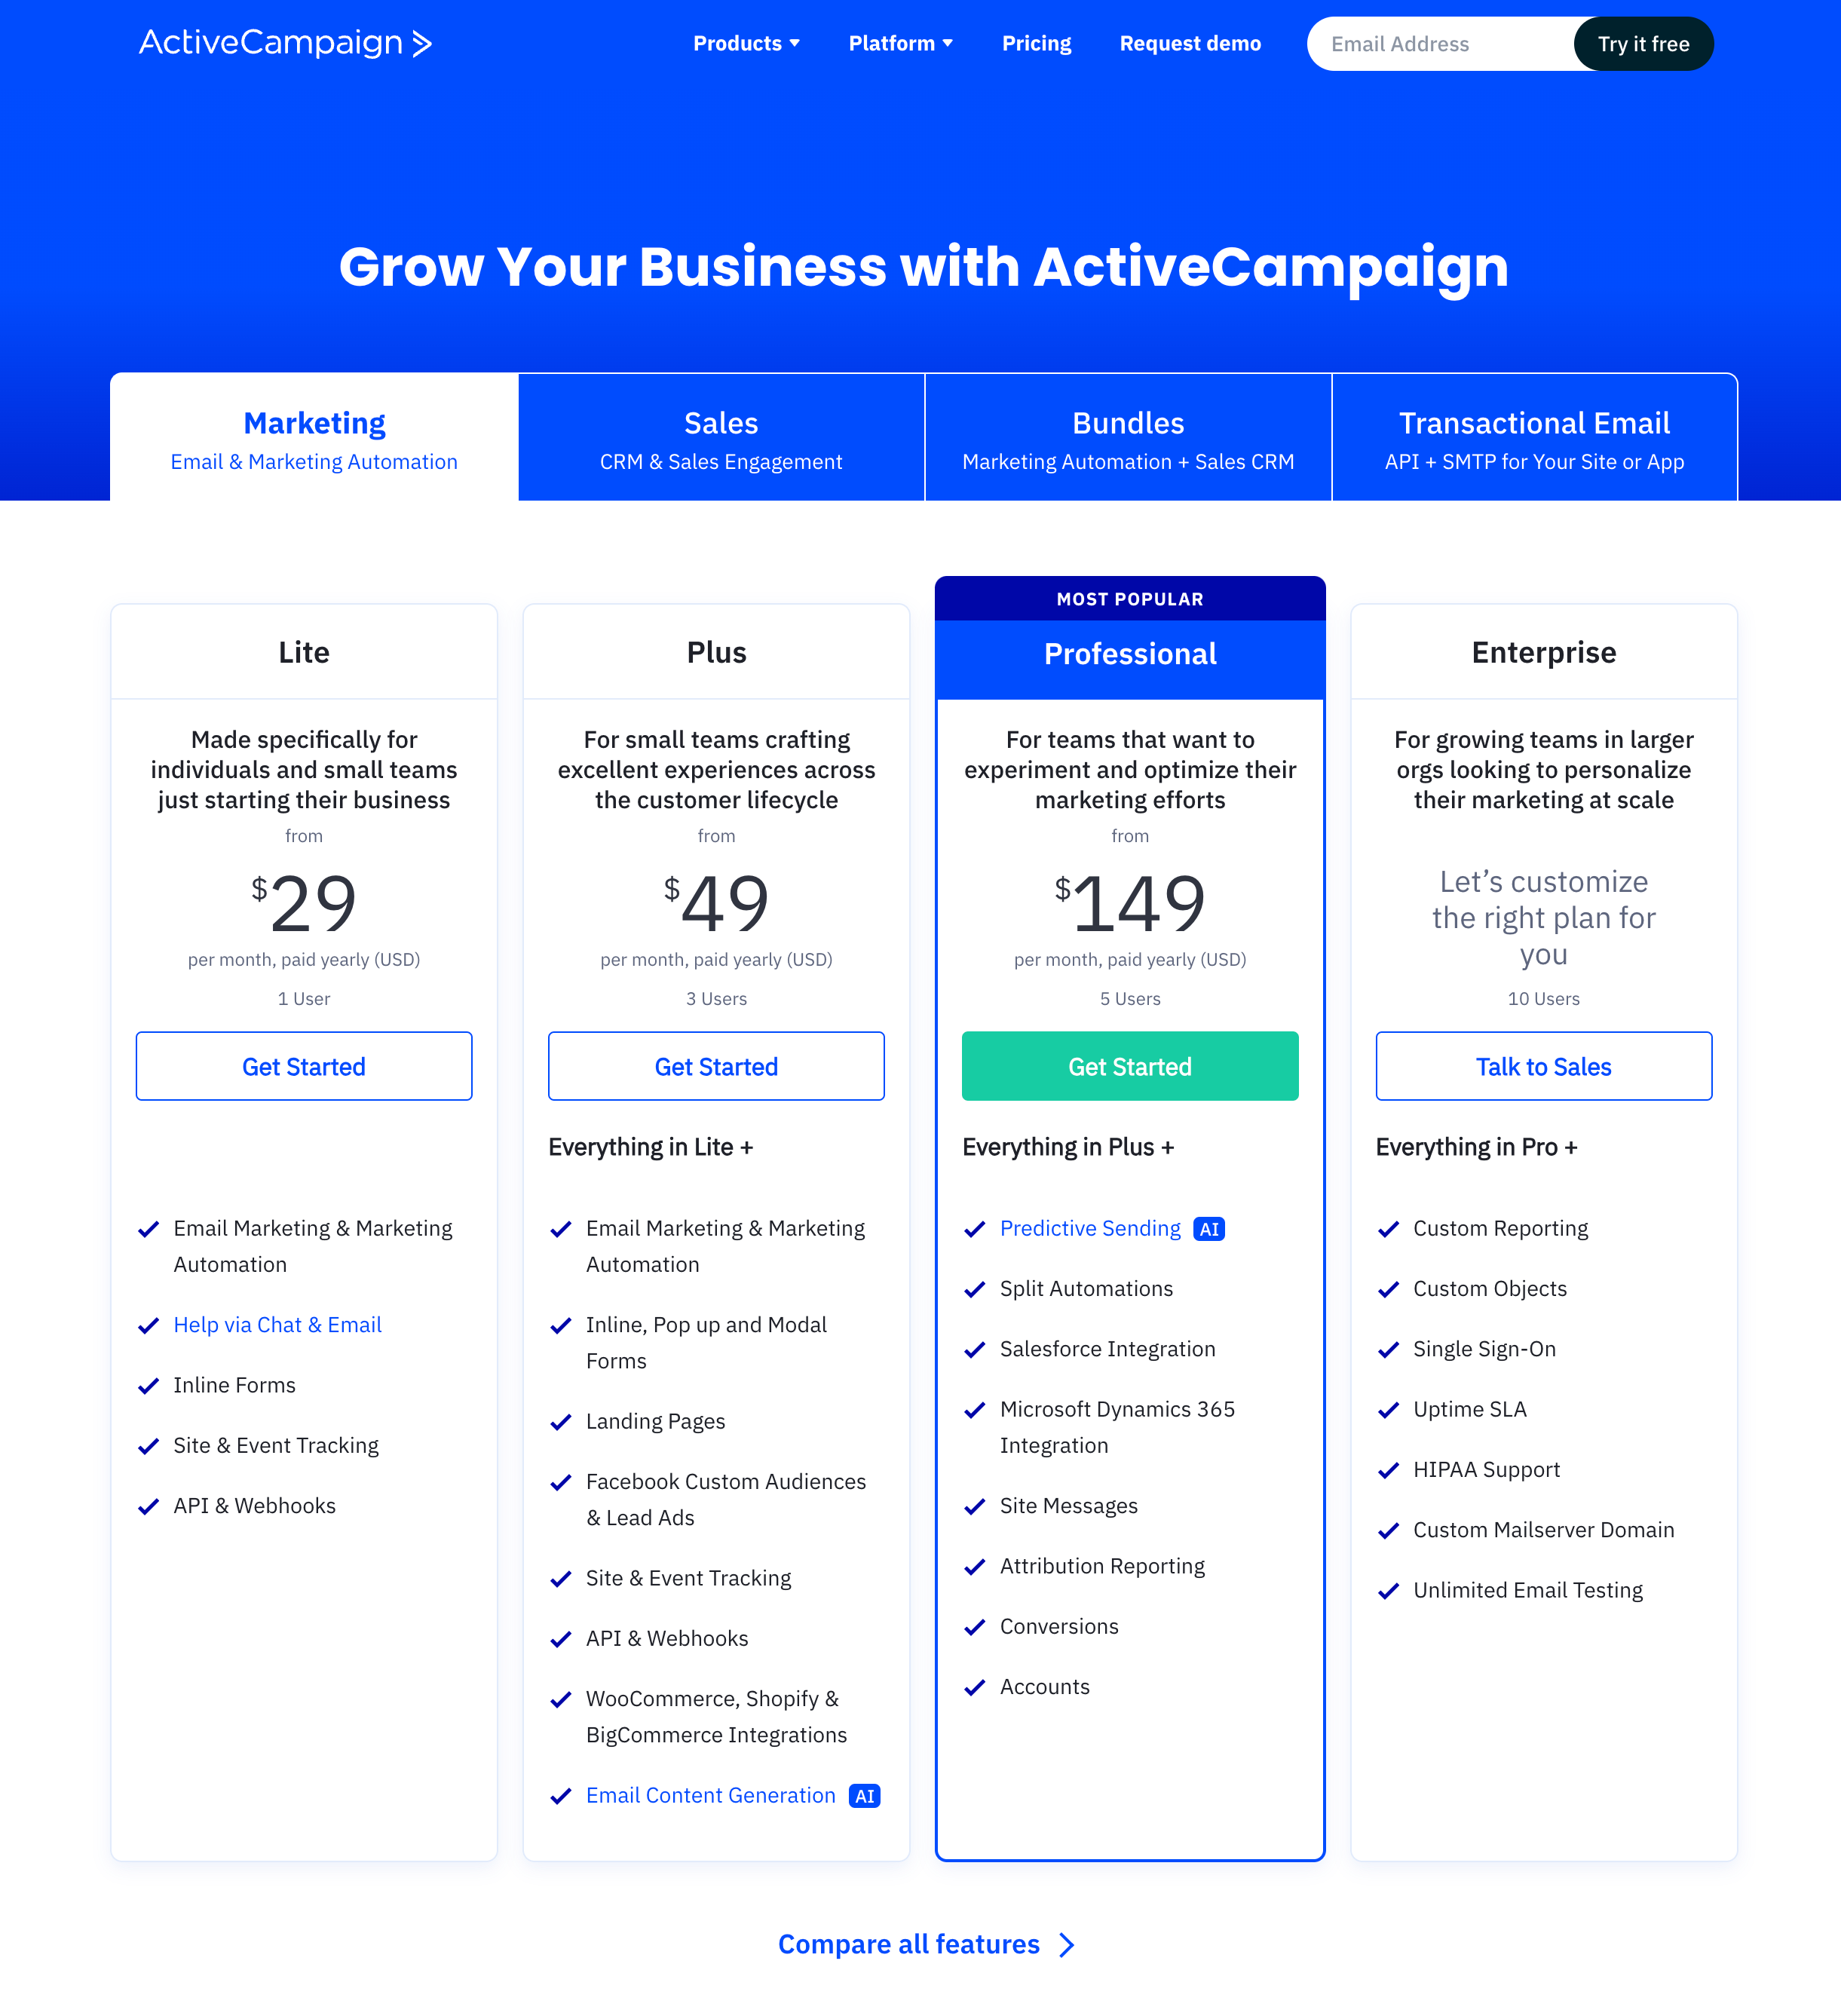 screenshot of activecampaign pricing, showing tiers prices at $29, $49, and $149 per month